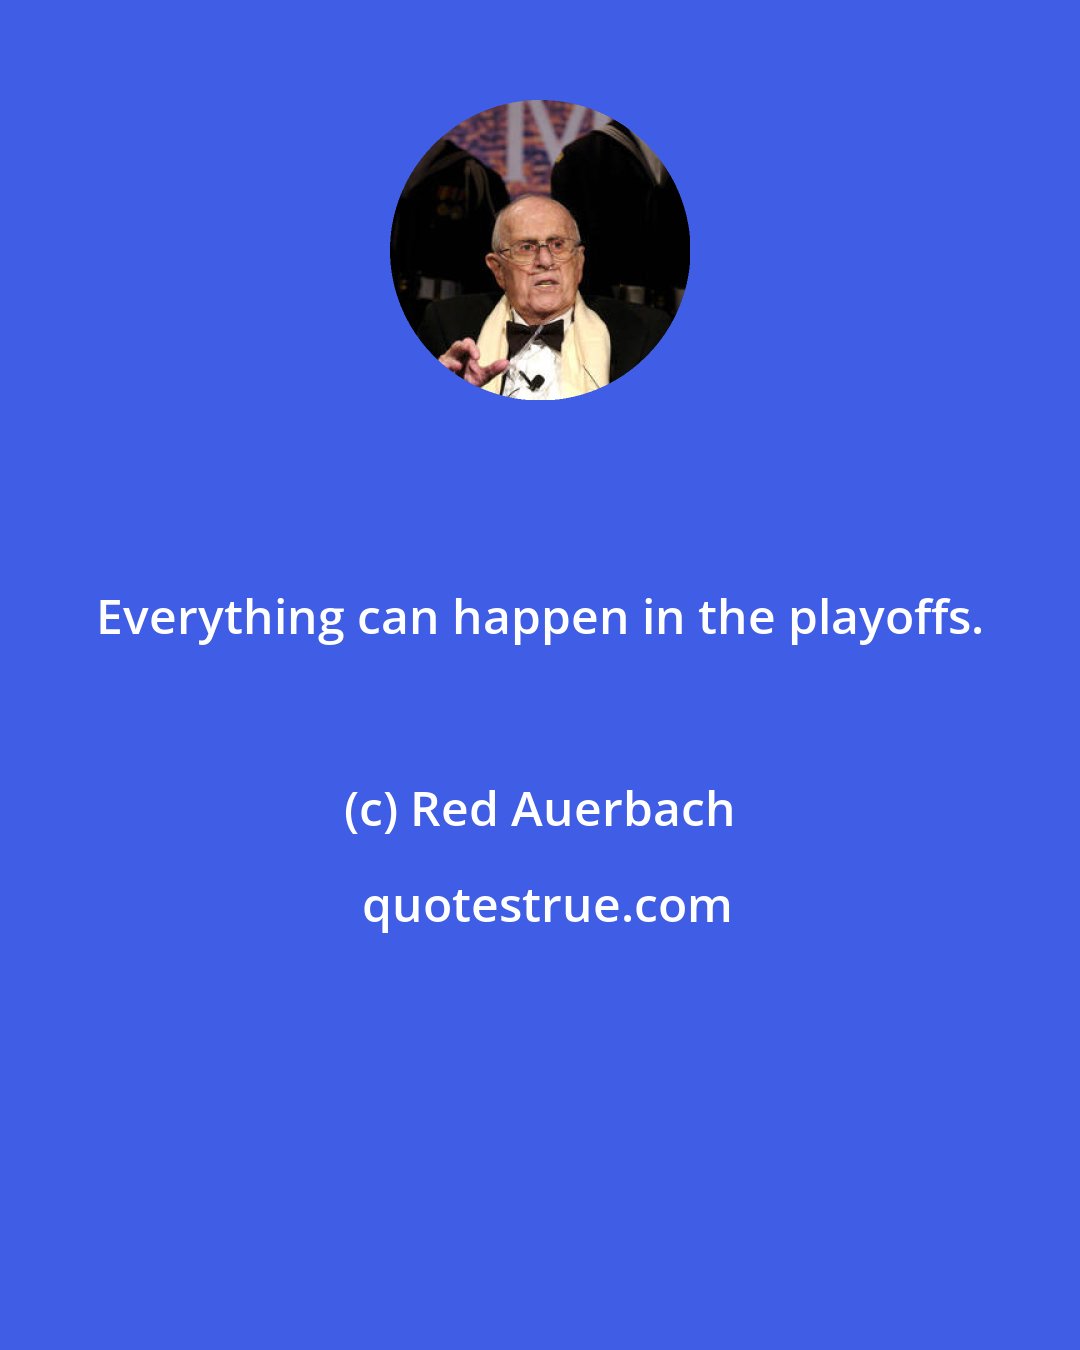 Red Auerbach: Everything can happen in the playoffs.